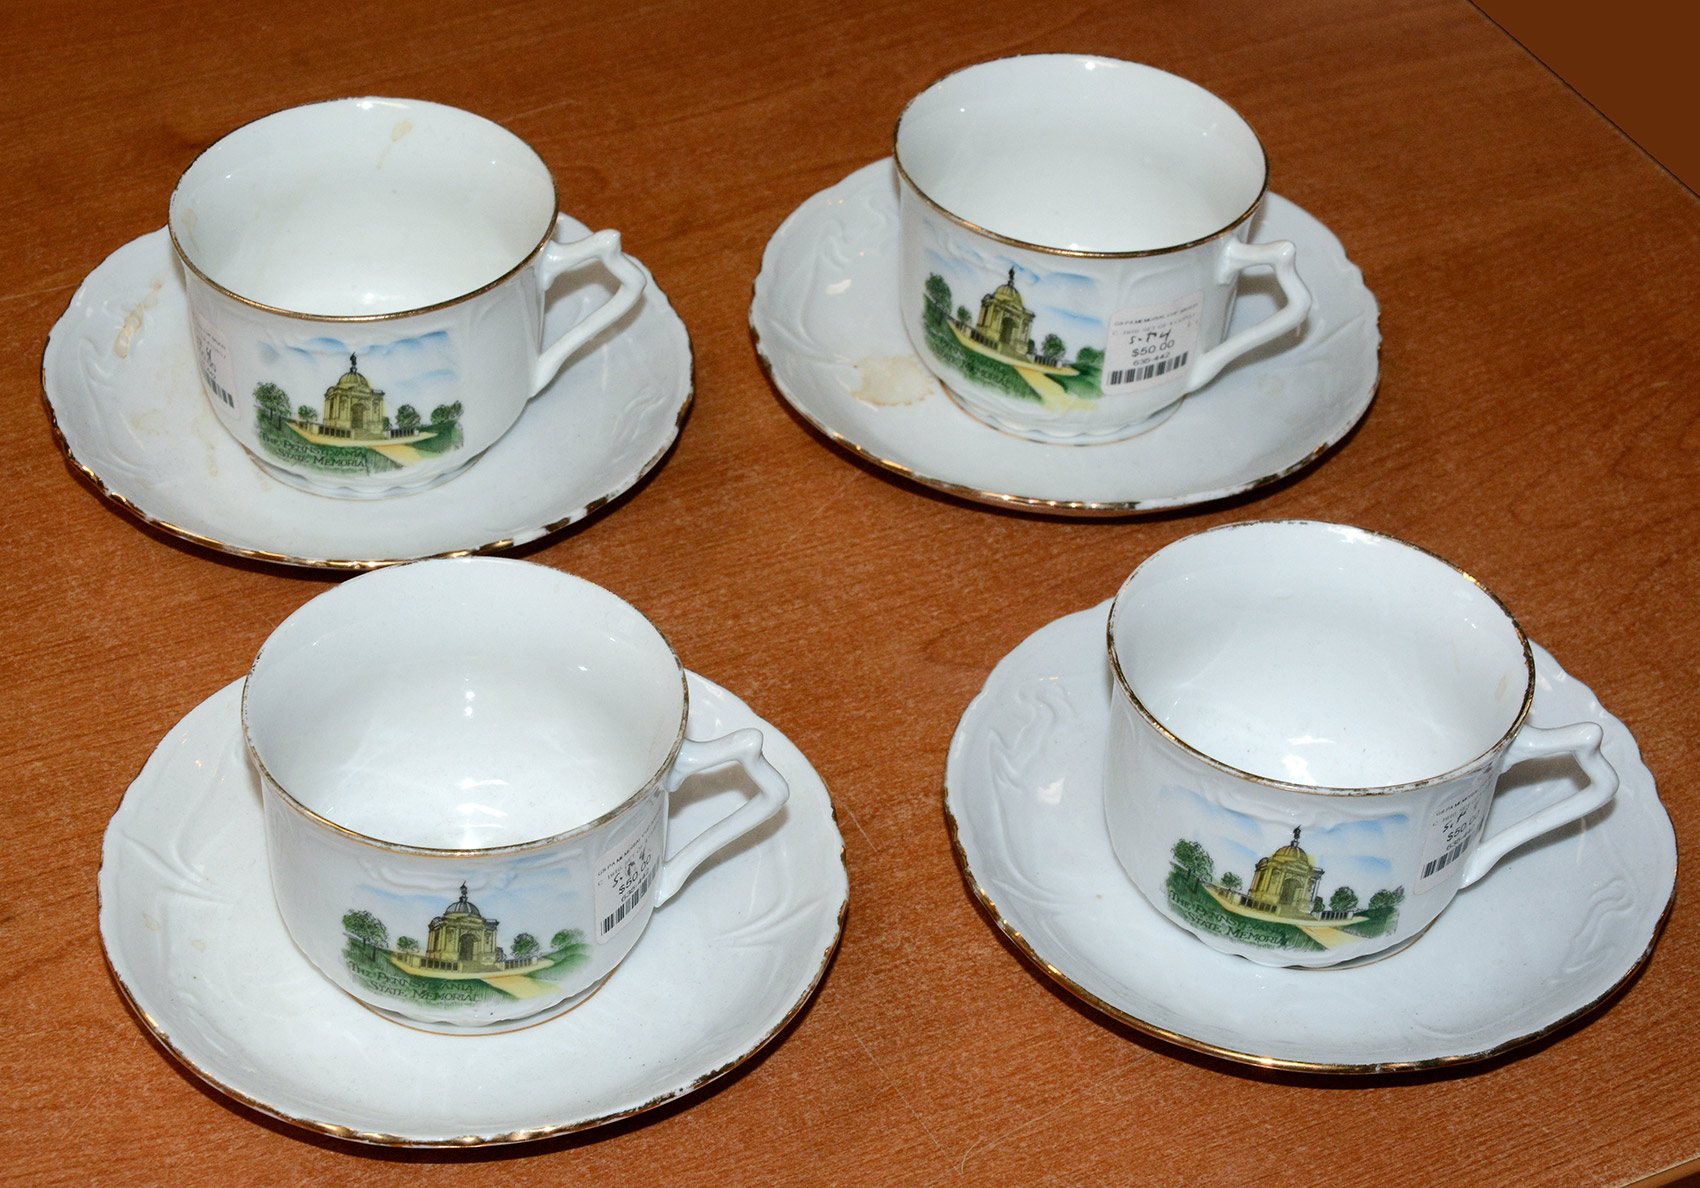 GETTYSBURG SOUVENIR SET OF 4 CUPS AND SAUCERS FEATURING THE PENNSYLVANIA MONUMENT